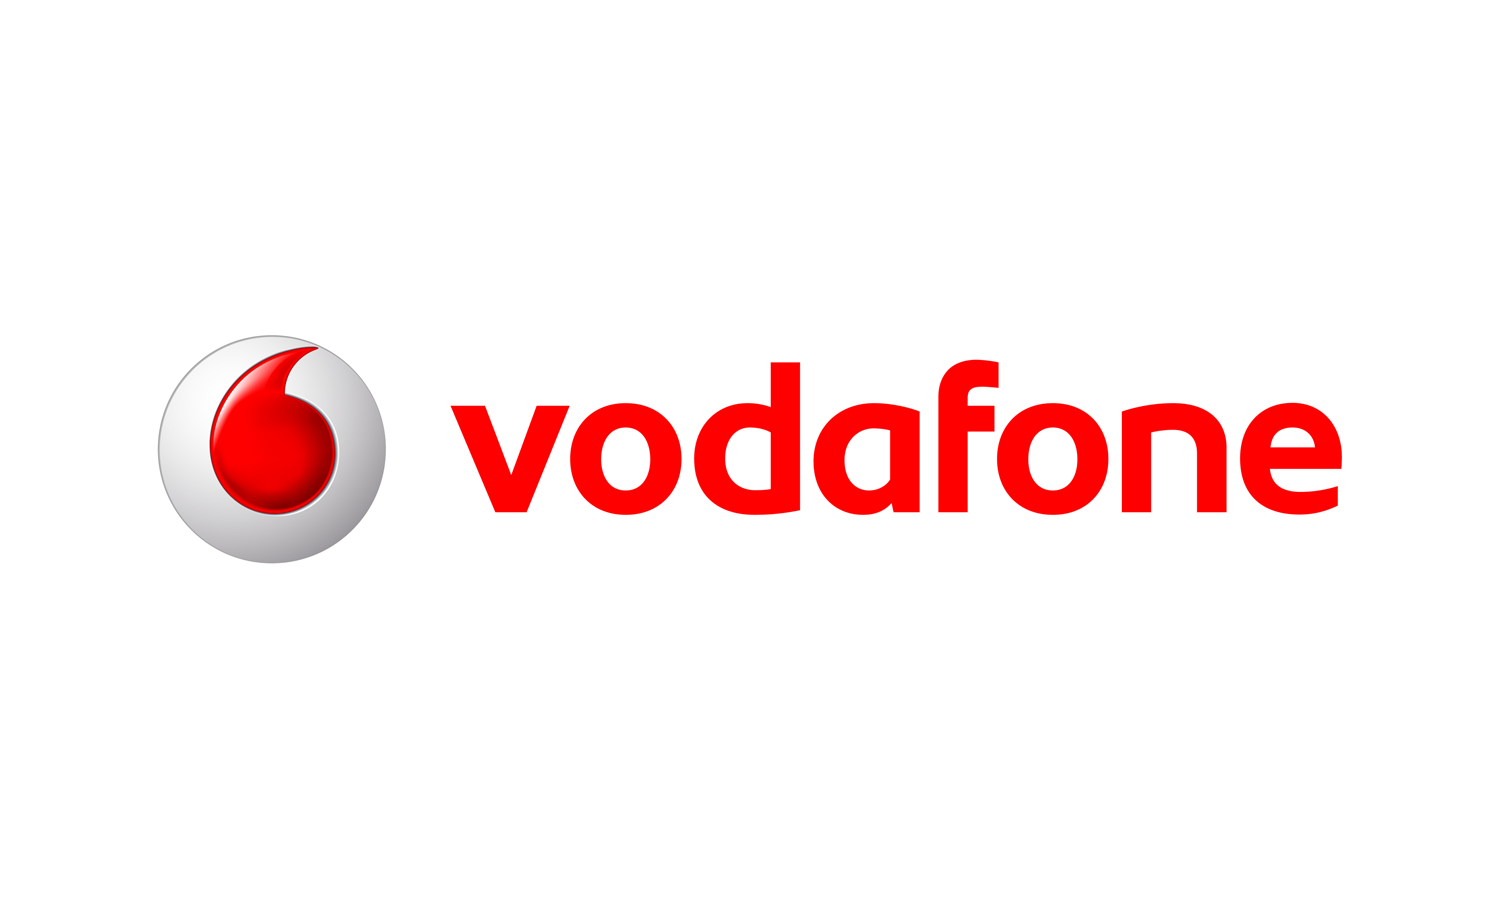 How to avail the 10 minute free talktime offer in Vodafone?